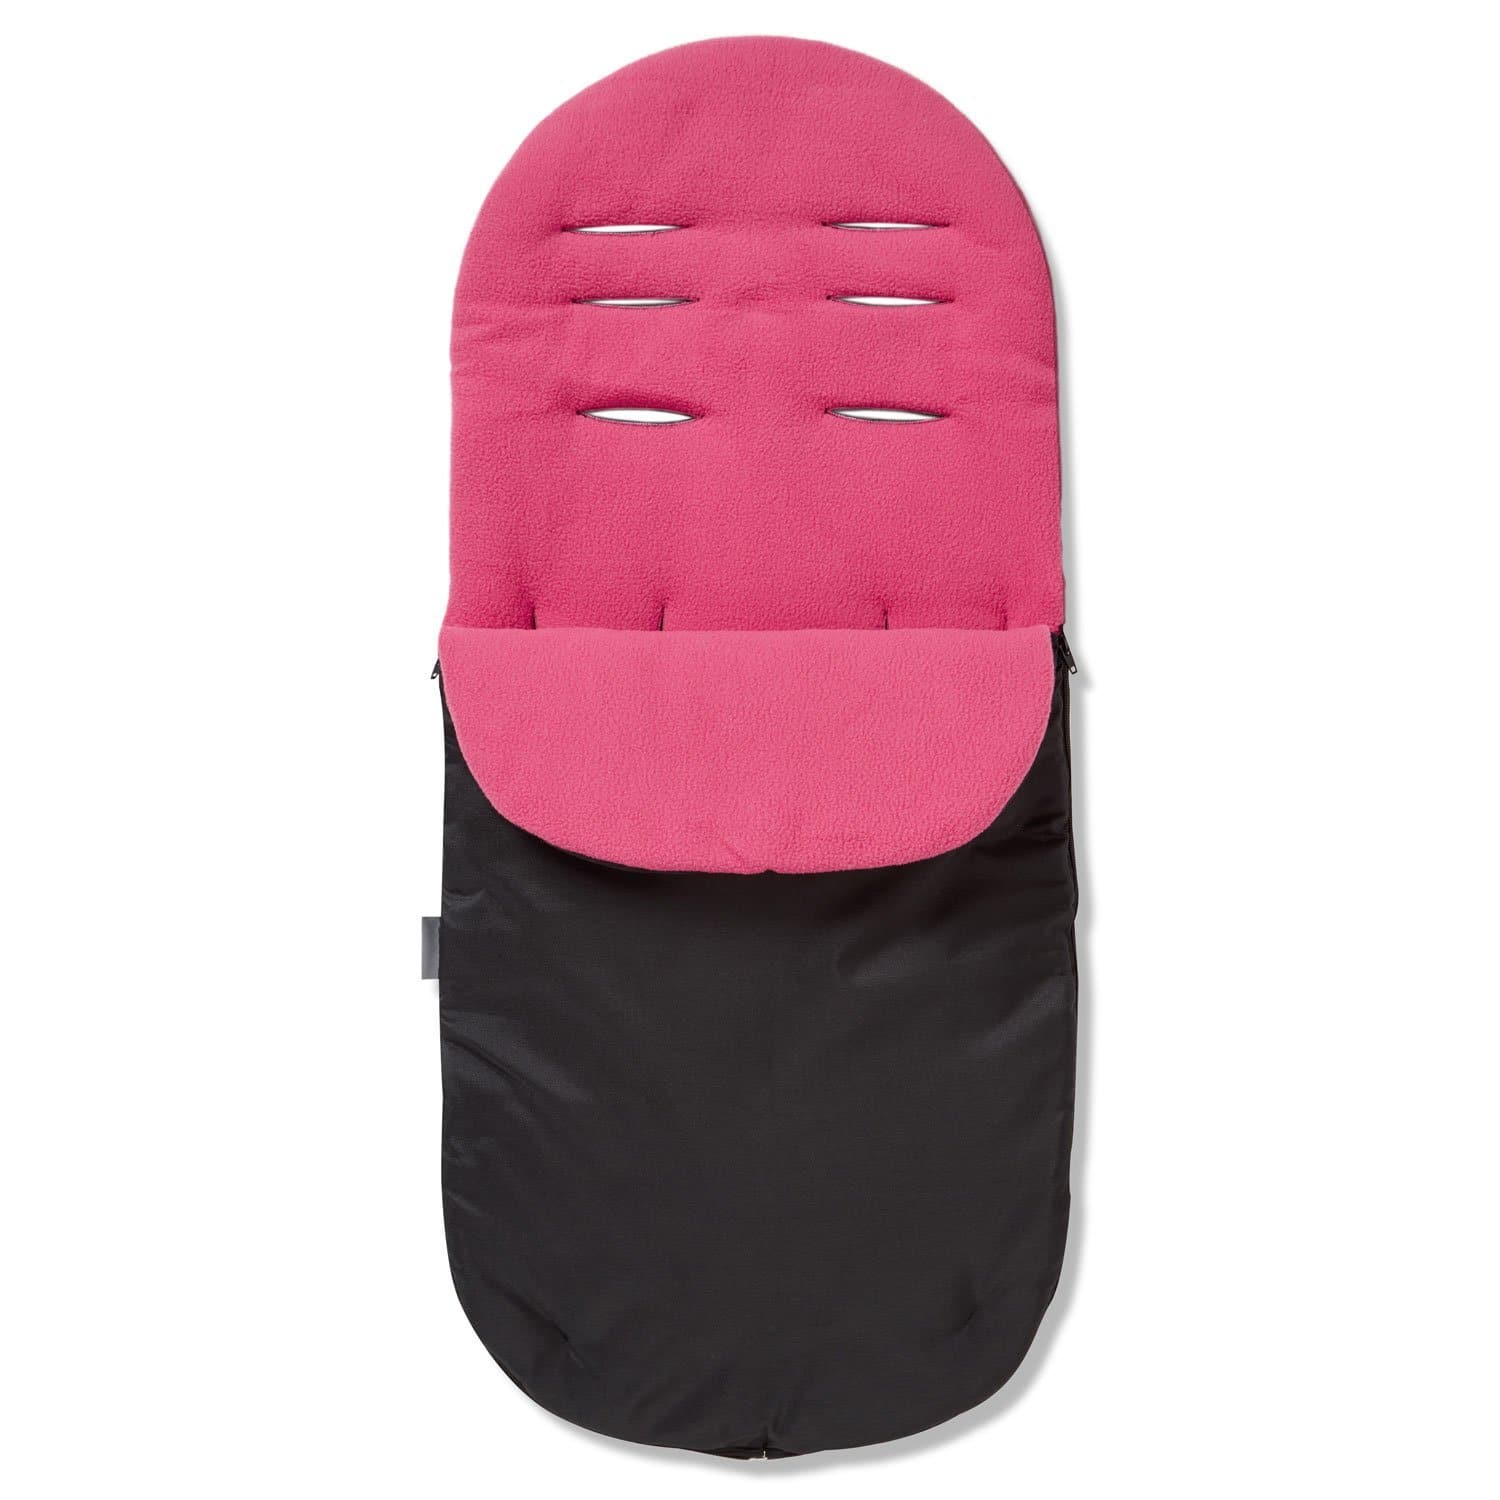 Footmuff / Cosy Toes Compatible with Graco - For Your Little One